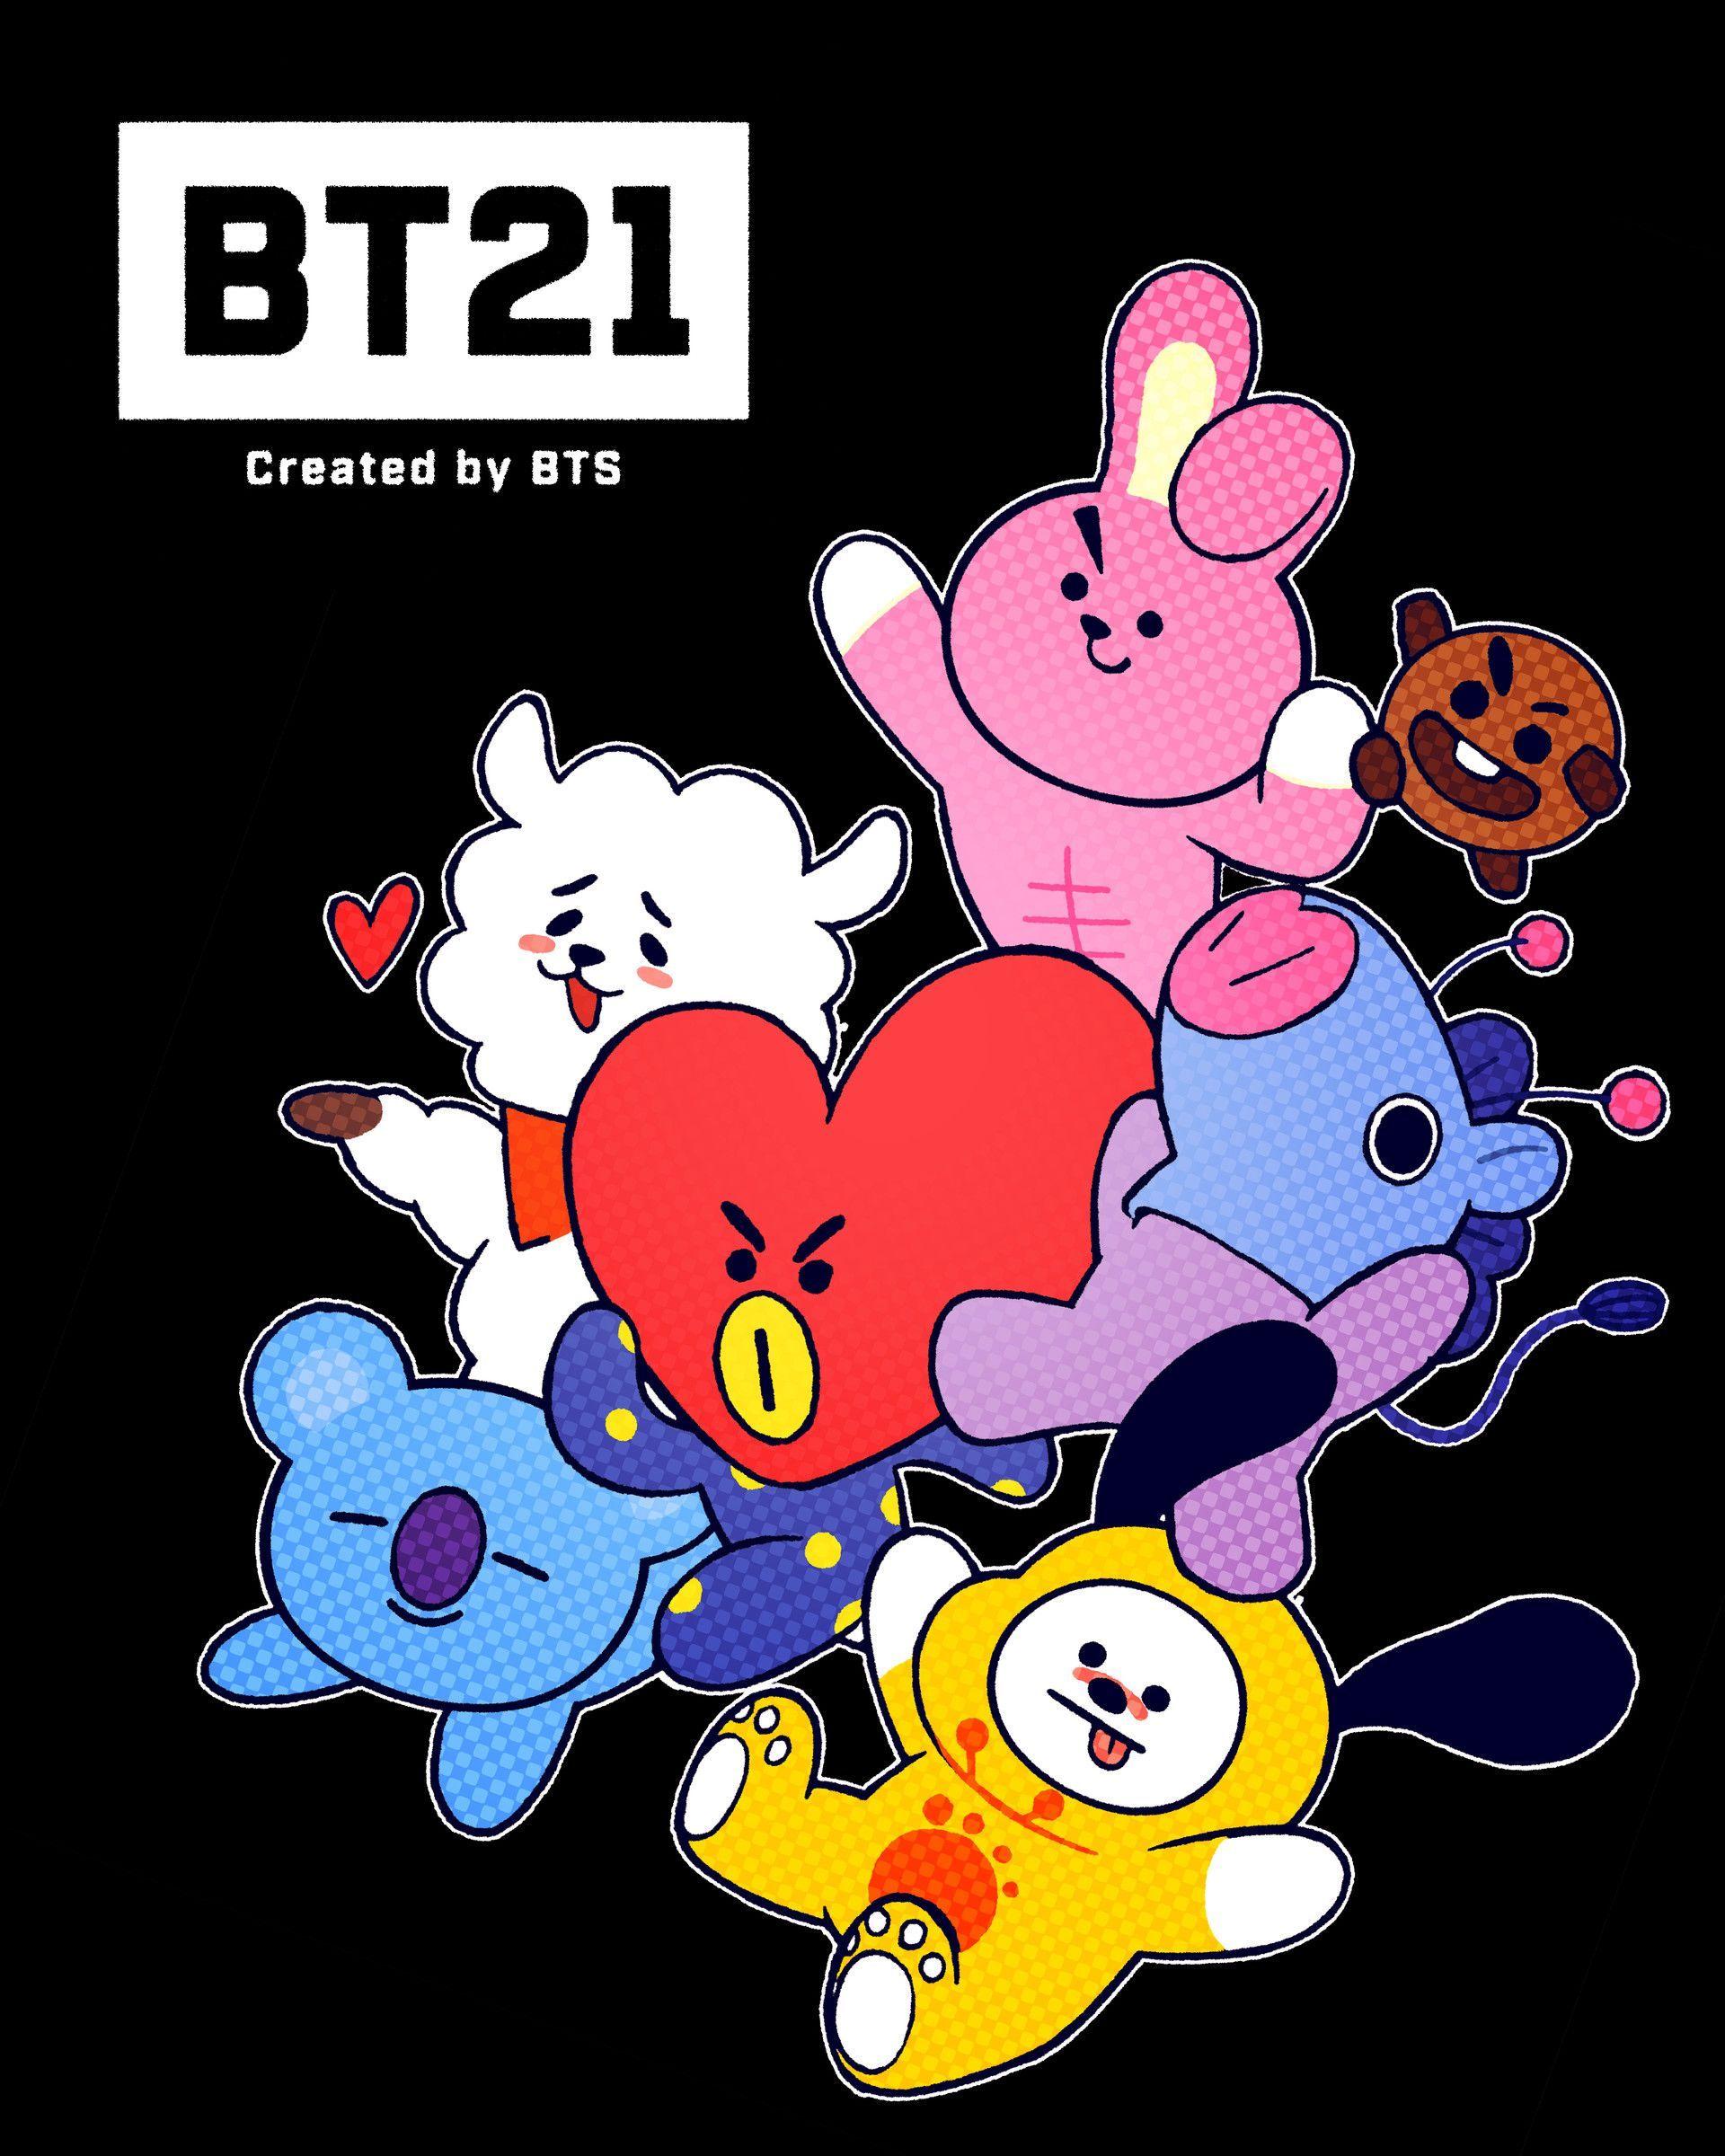 Bts Cartoon Keyboard Wallpaper / Lol, look at these cute backgrounds of